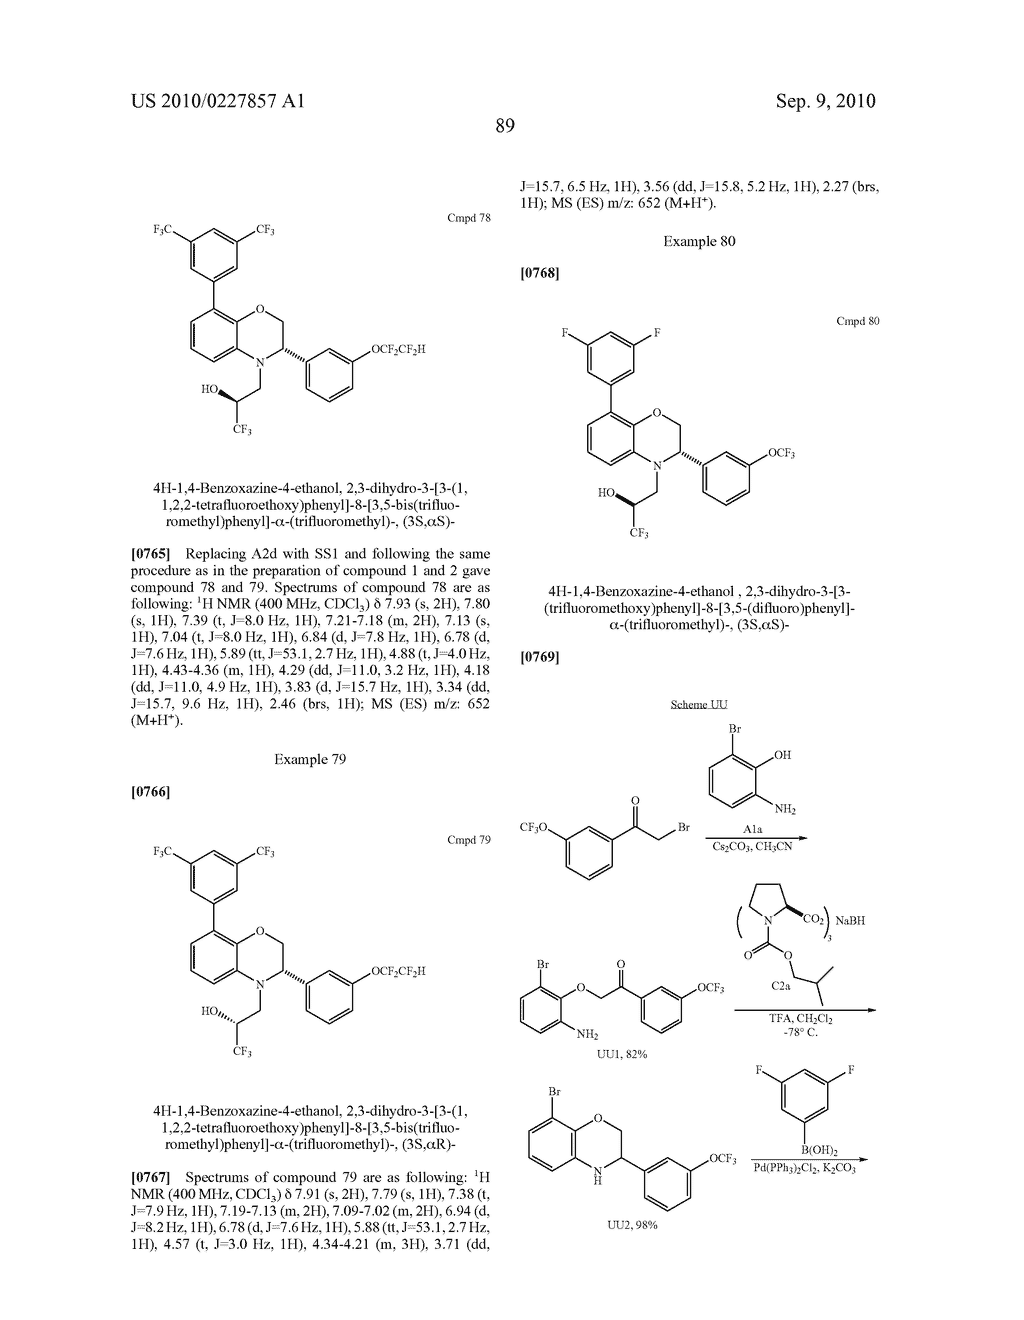 3,4-DIHYDRO-2H-BENZO[1,4]OXAZINE AND THIAZINE DERIVATIVES AS CETP INHIBITORS - diagram, schematic, and image 90